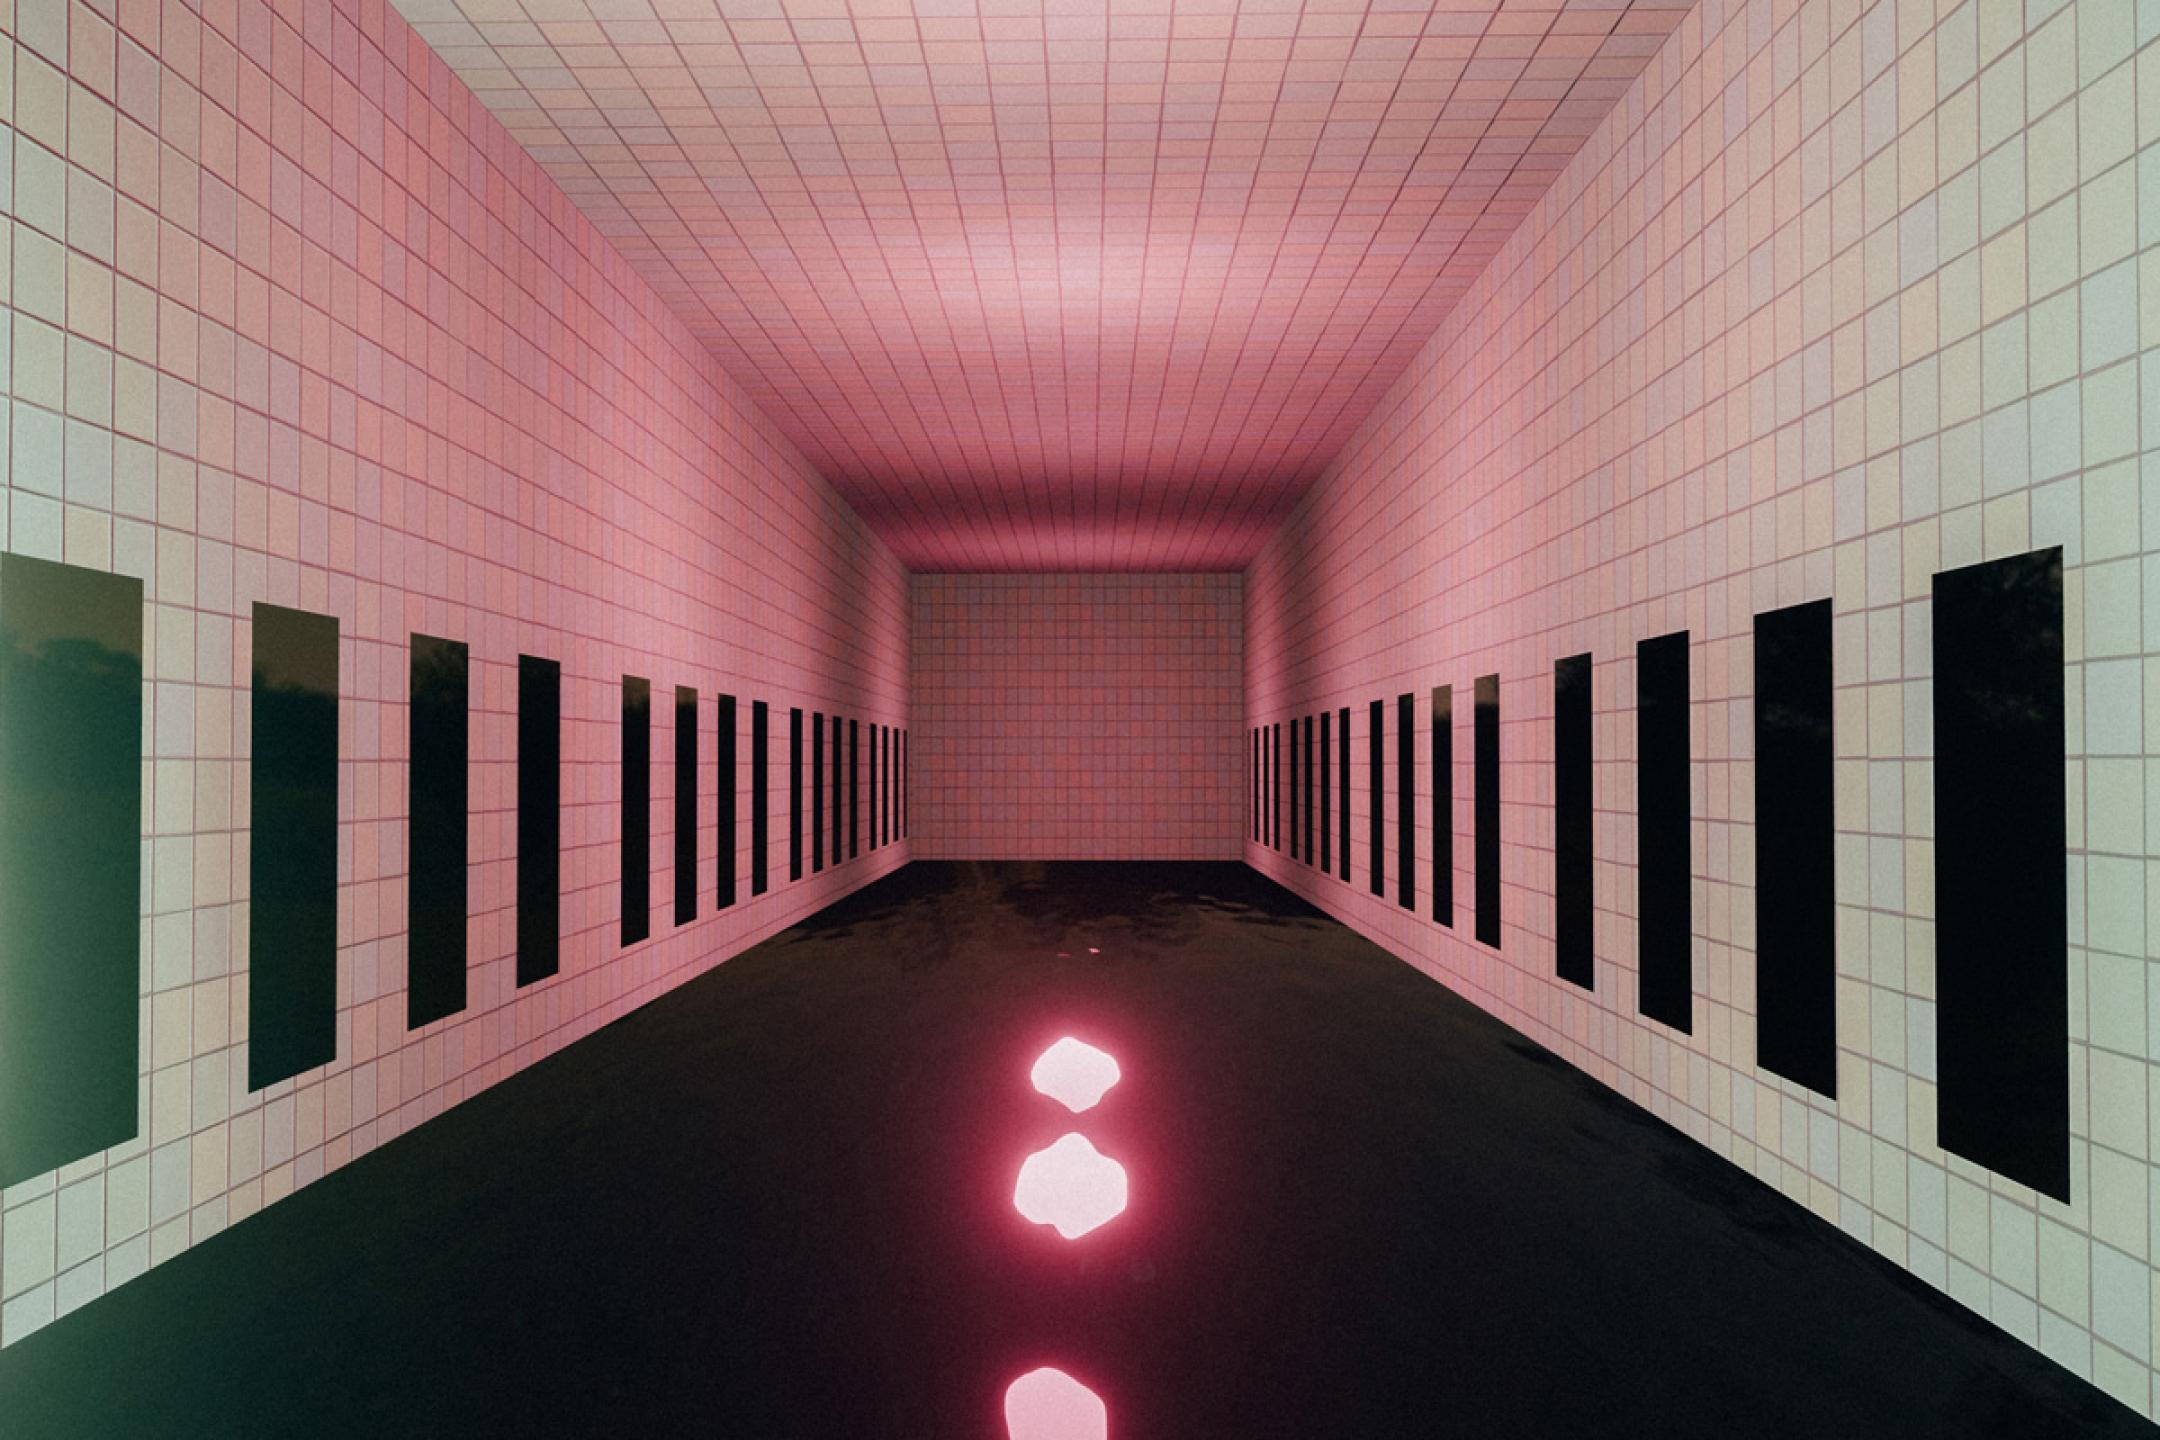 An elongated room with white tiles on the walls and black floor, illuminated by pink points of light.